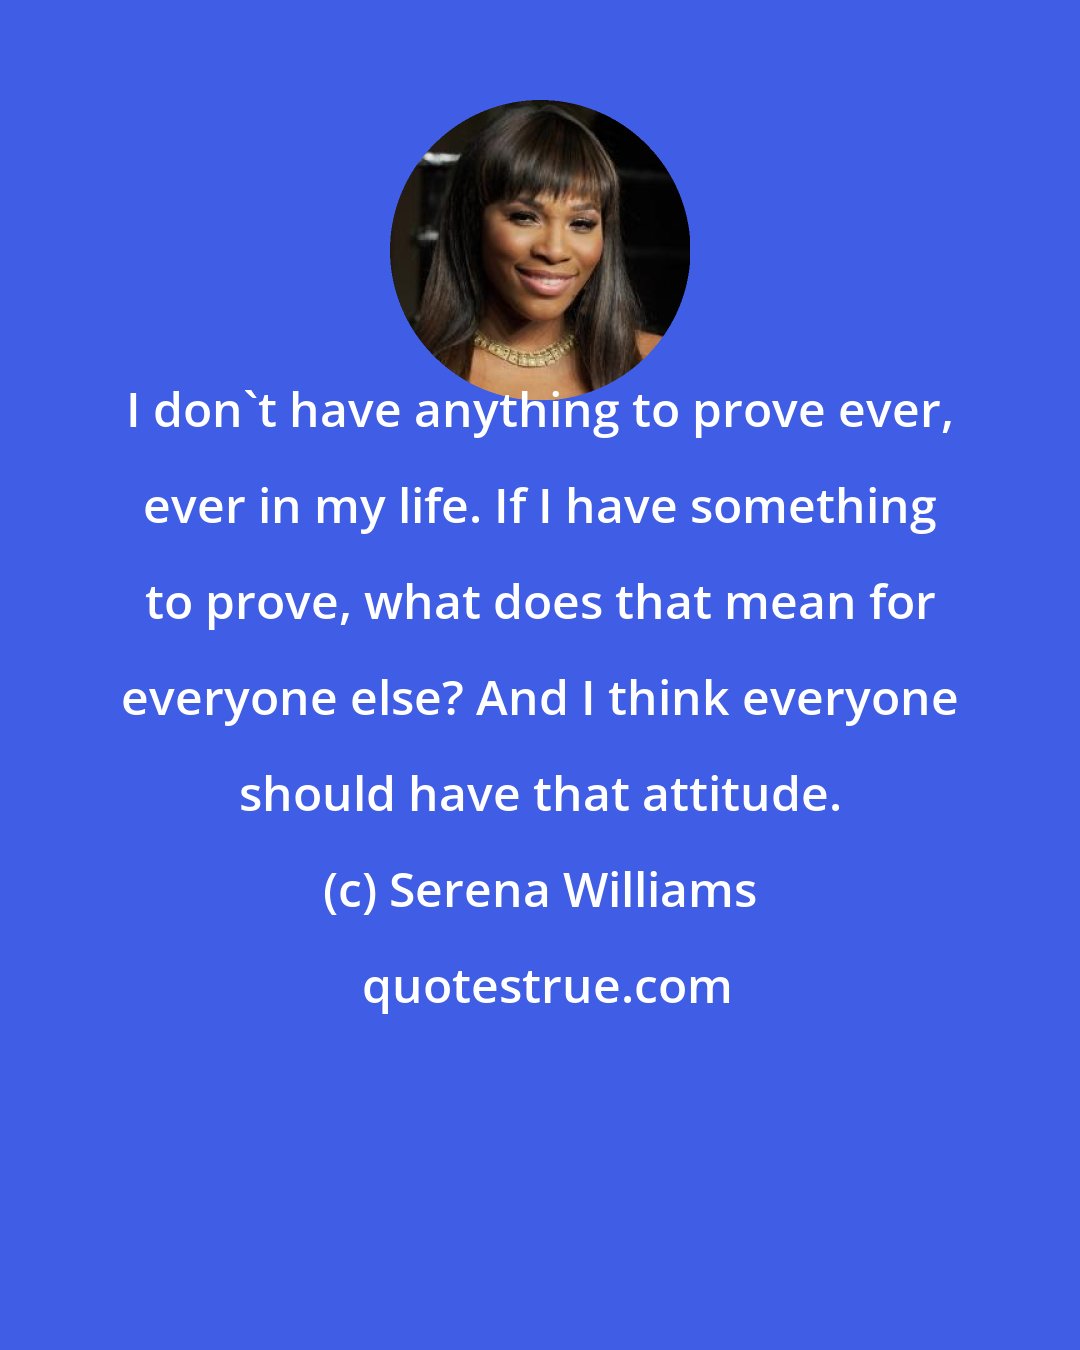 Serena Williams: I don't have anything to prove ever, ever in my life. If I have something to prove, what does that mean for everyone else? And I think everyone should have that attitude.